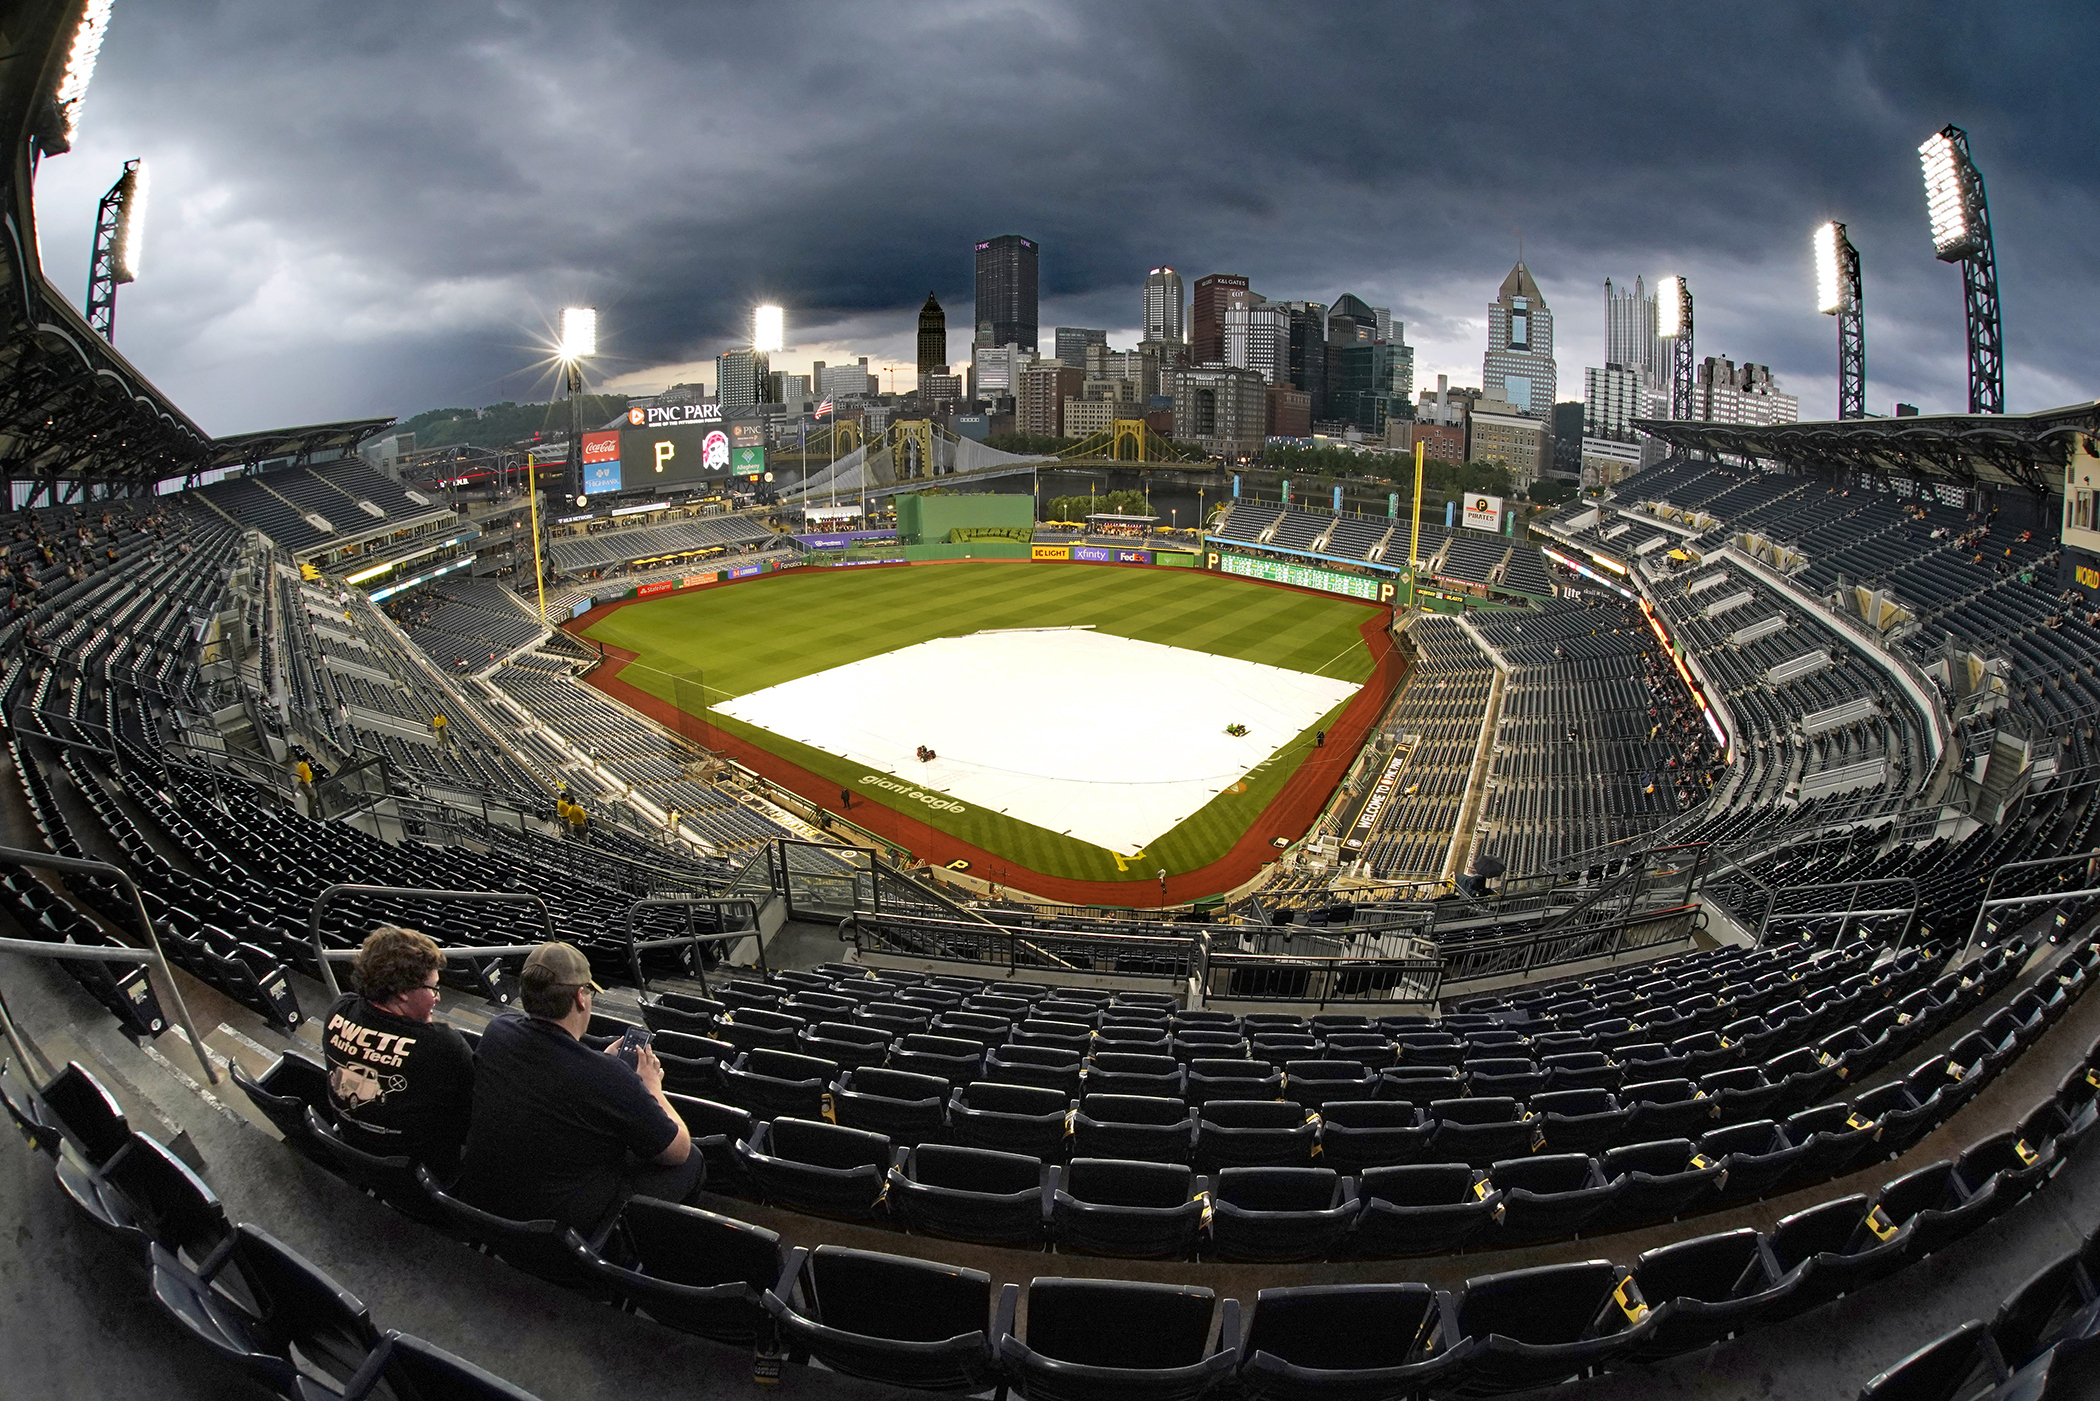 Yankees-Pirates weather forecast calls for rain, thunderstorms at PNC Park  